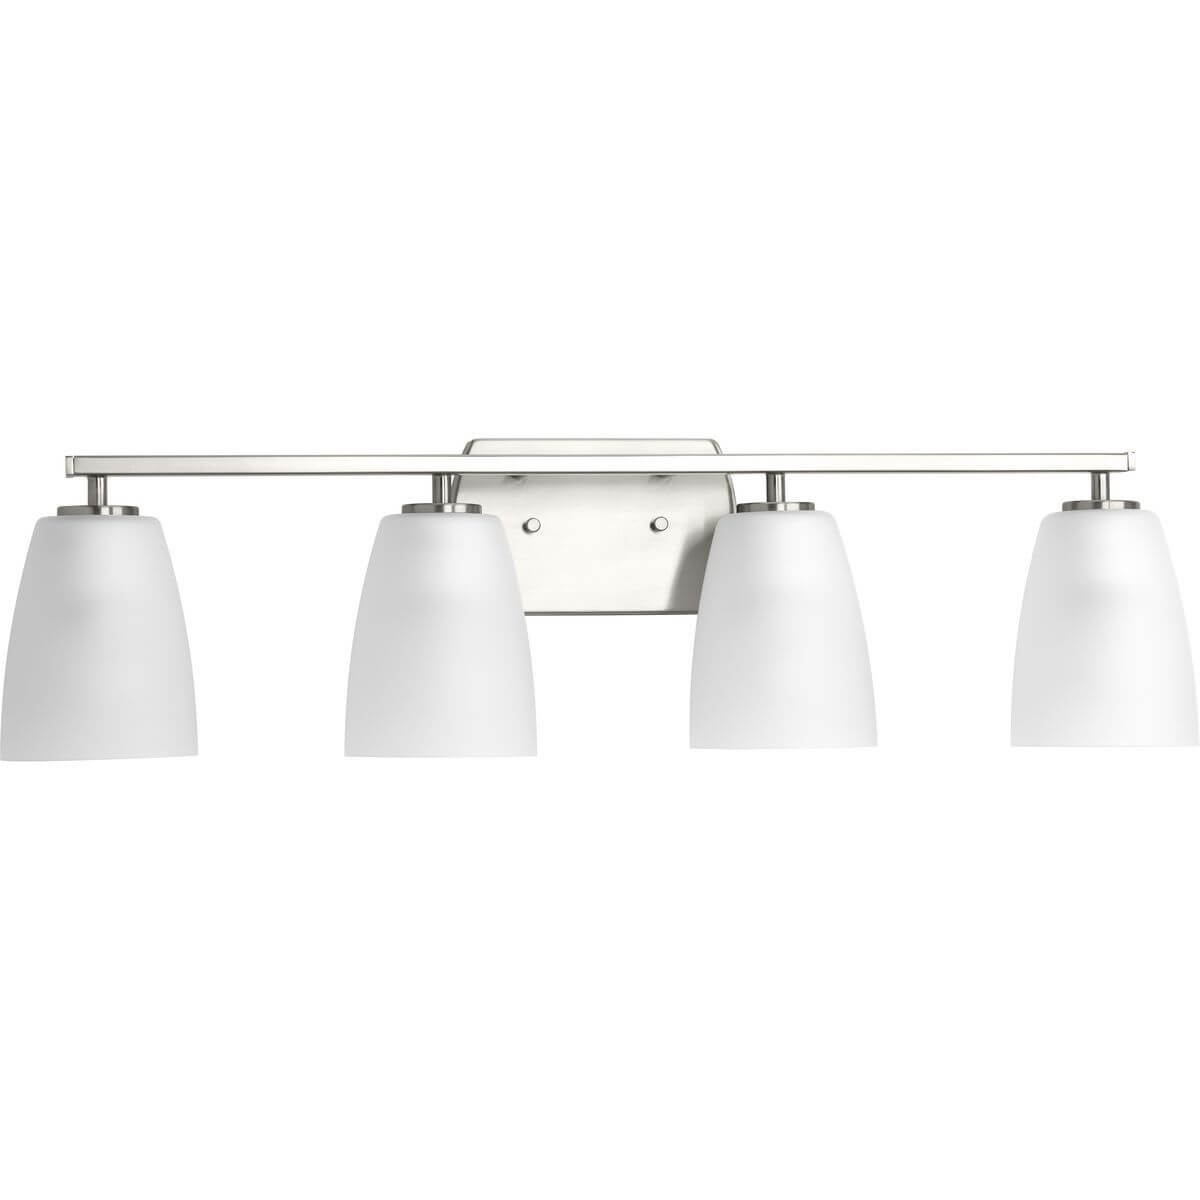 Progress Lighting Leap 4 Light 32 inch Bath Vanity Light in Brushed Nickel with Etched Glass P300134-009